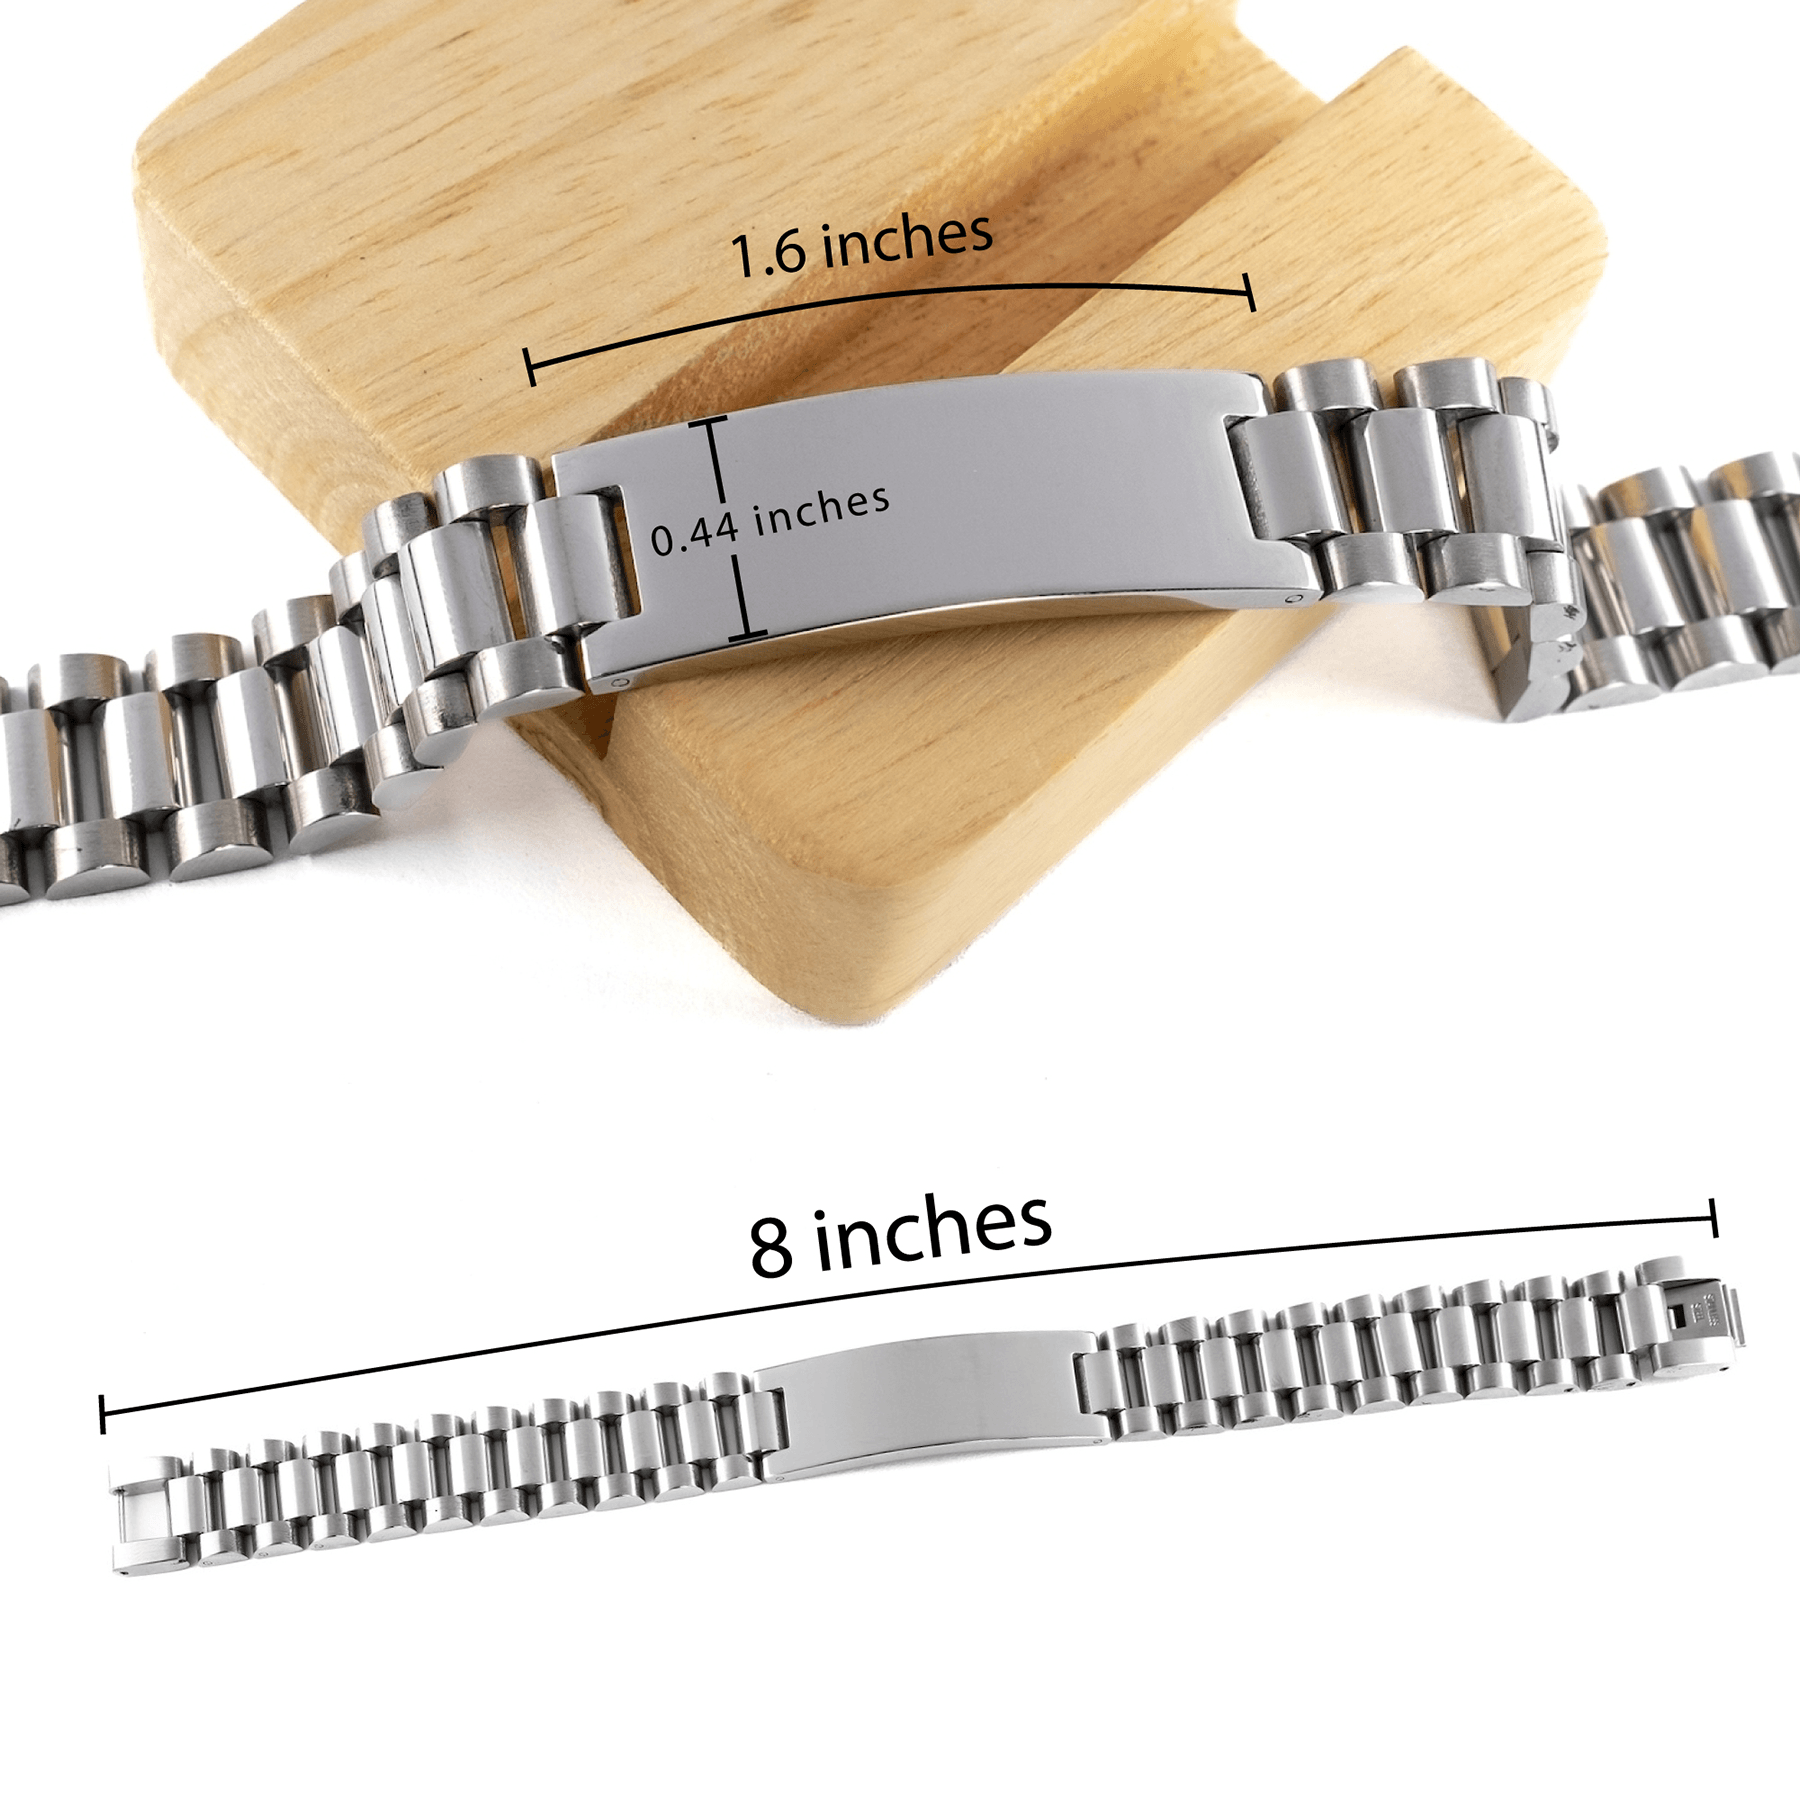 Marketing Manager Ladder Stainless Steel Engraved Bracelet - Thanks for being who you are - Birthday Christmas Jewelry Gifts Coworkers Colleague Boss - Mallard Moon Gift Shop